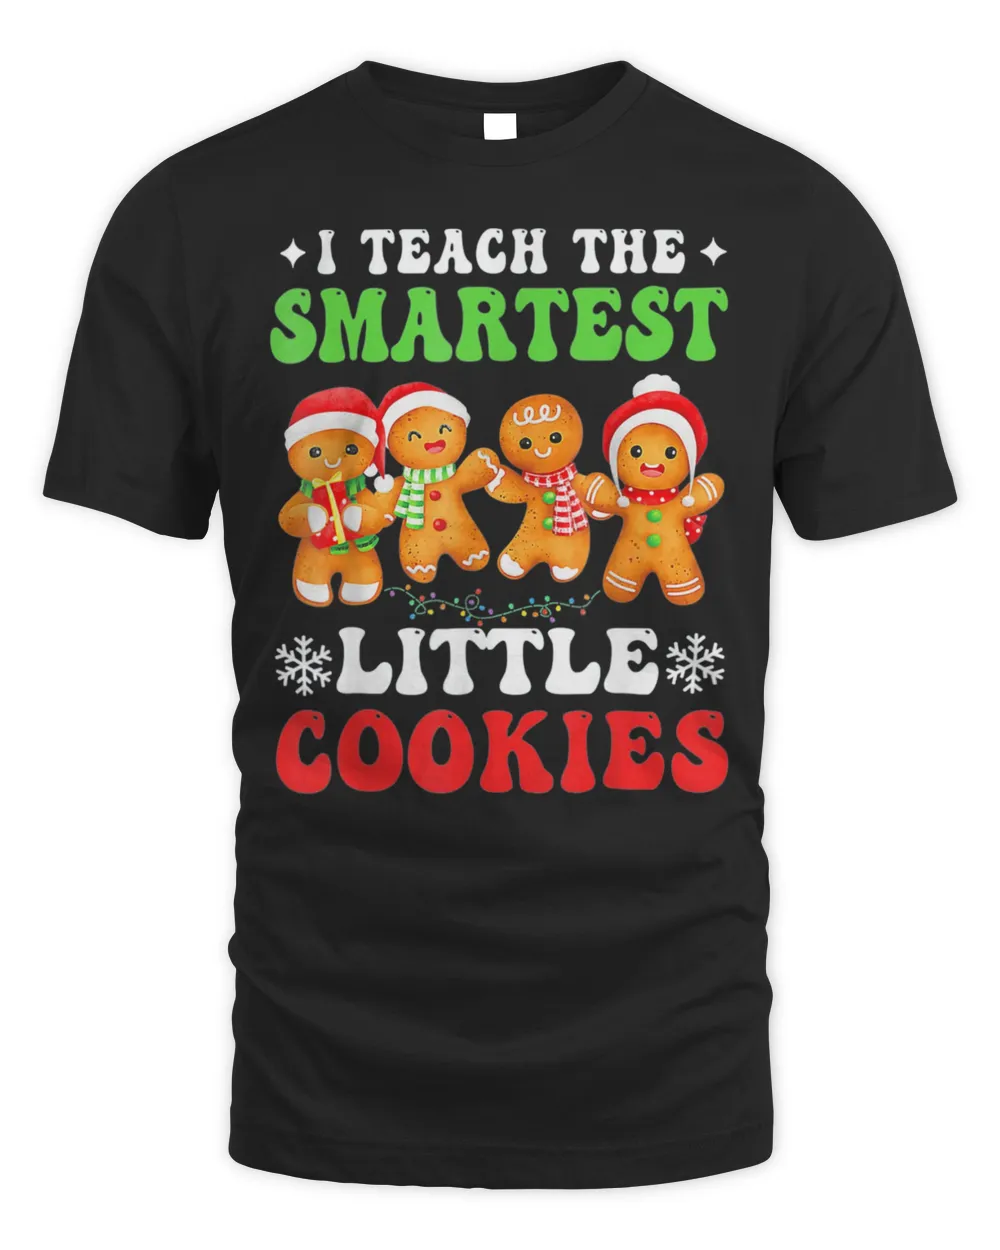 I Teach The Smartest Cookies Gingerbread Christmas Groovy T-Shirt